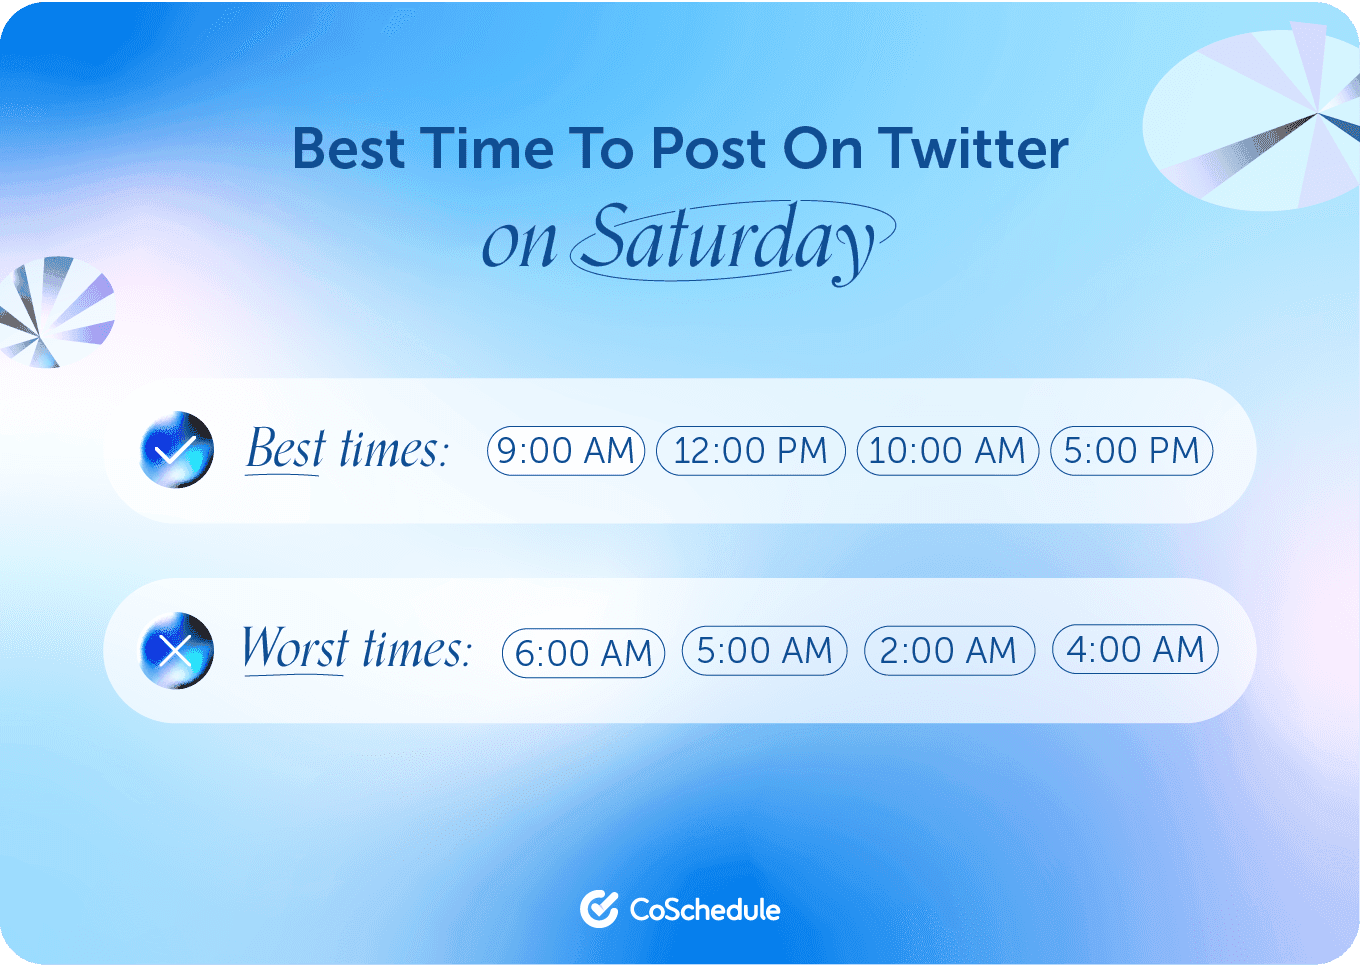 Coschedule graphic on the best times to post to Twitter on Saturday